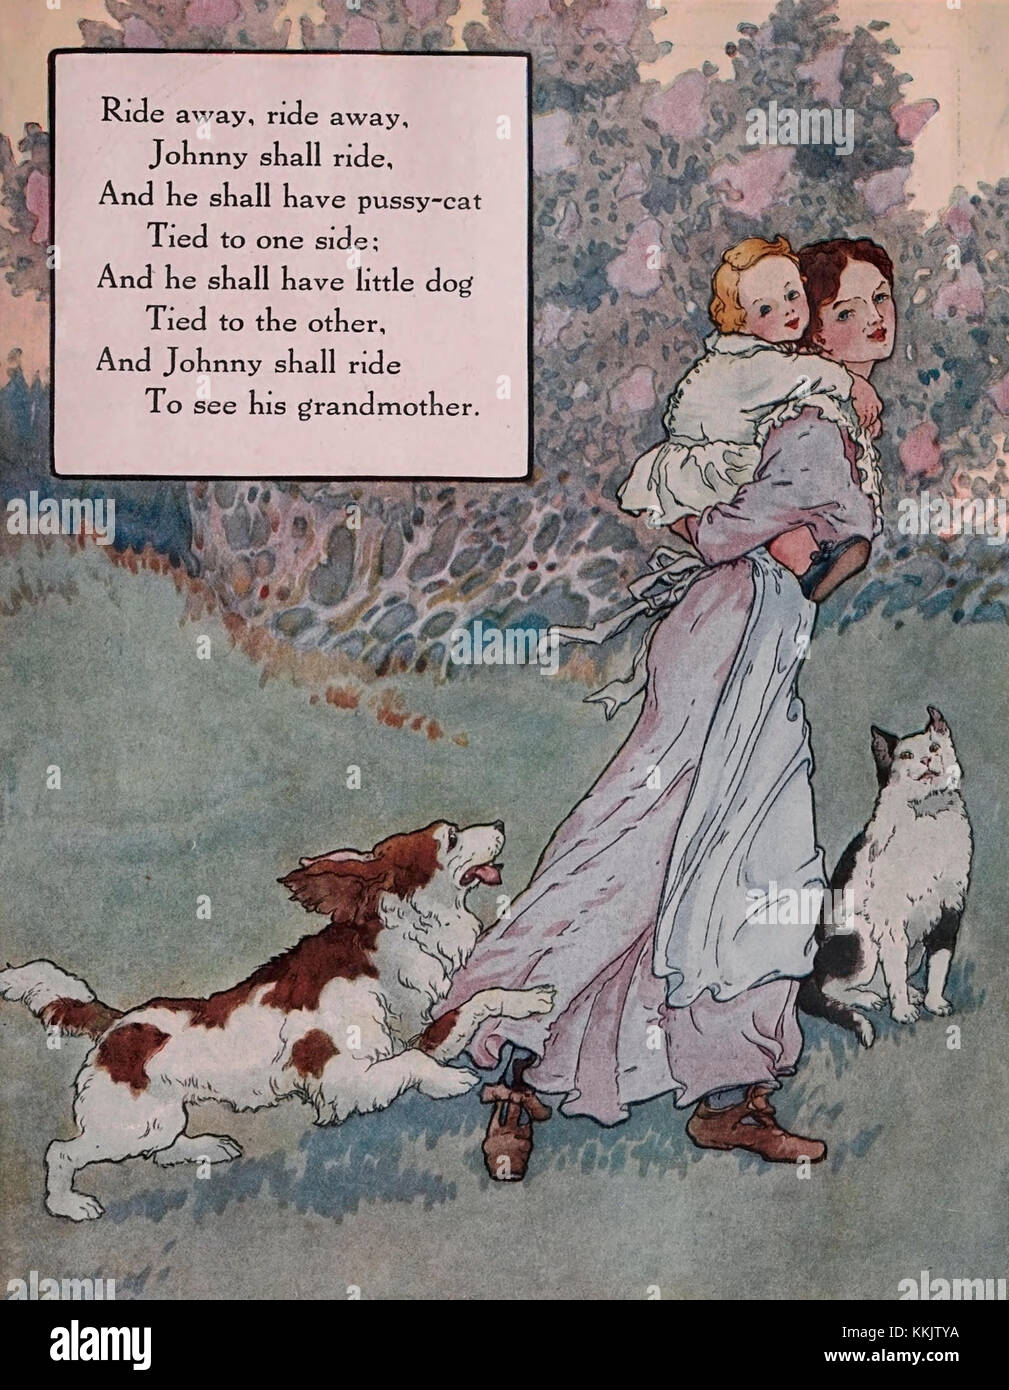 Ride Away, ride away, Johnny shall ride, and he shall have pussycat tied to one side; and he shall have little dog tied to the other, and Johnny shall ride to see his grandmother - Mother Goose Mursery Rhyme Stock Photo